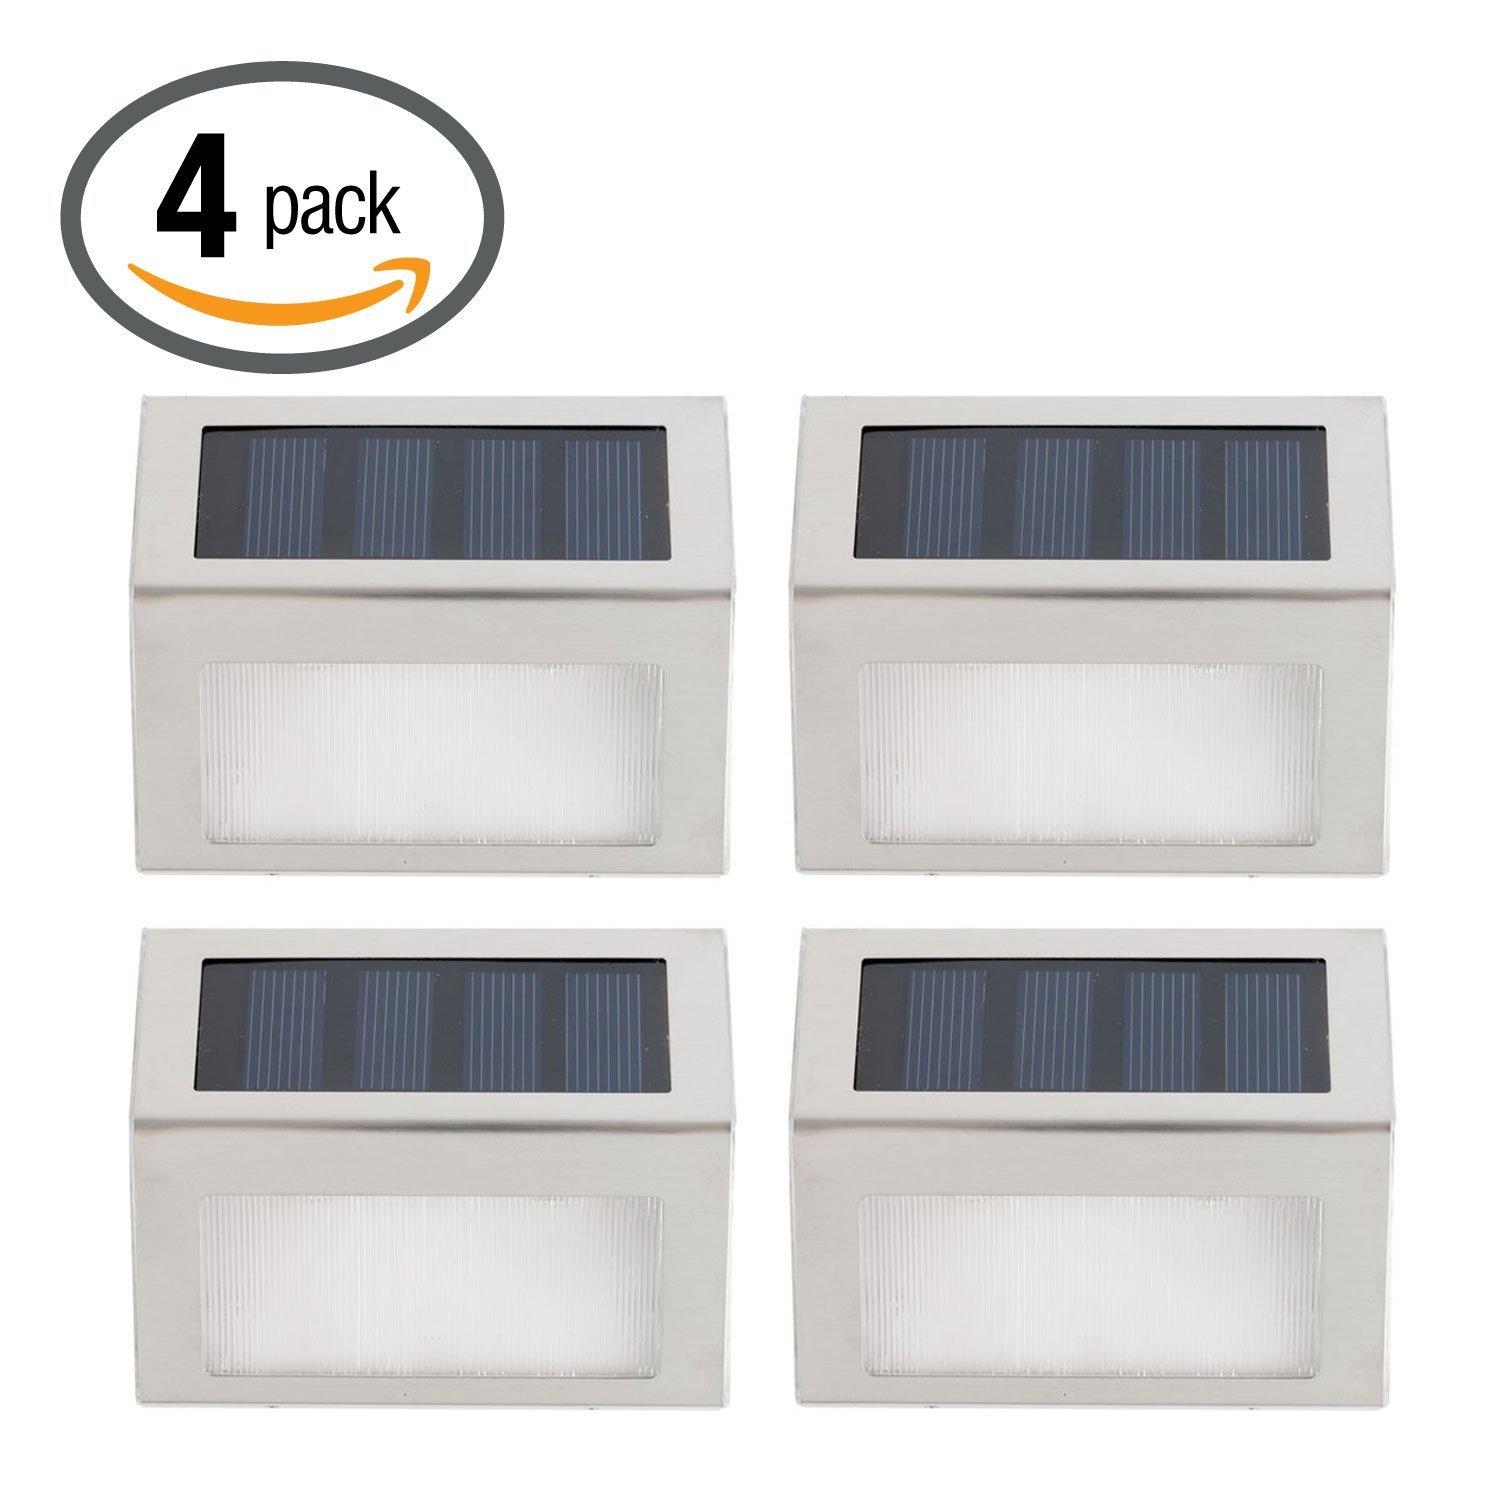 Hoont Outdoor Stainless Steel LED Solar Step Light   Pack of 4   Illuminates Stairs, Deck, Patio, Etc